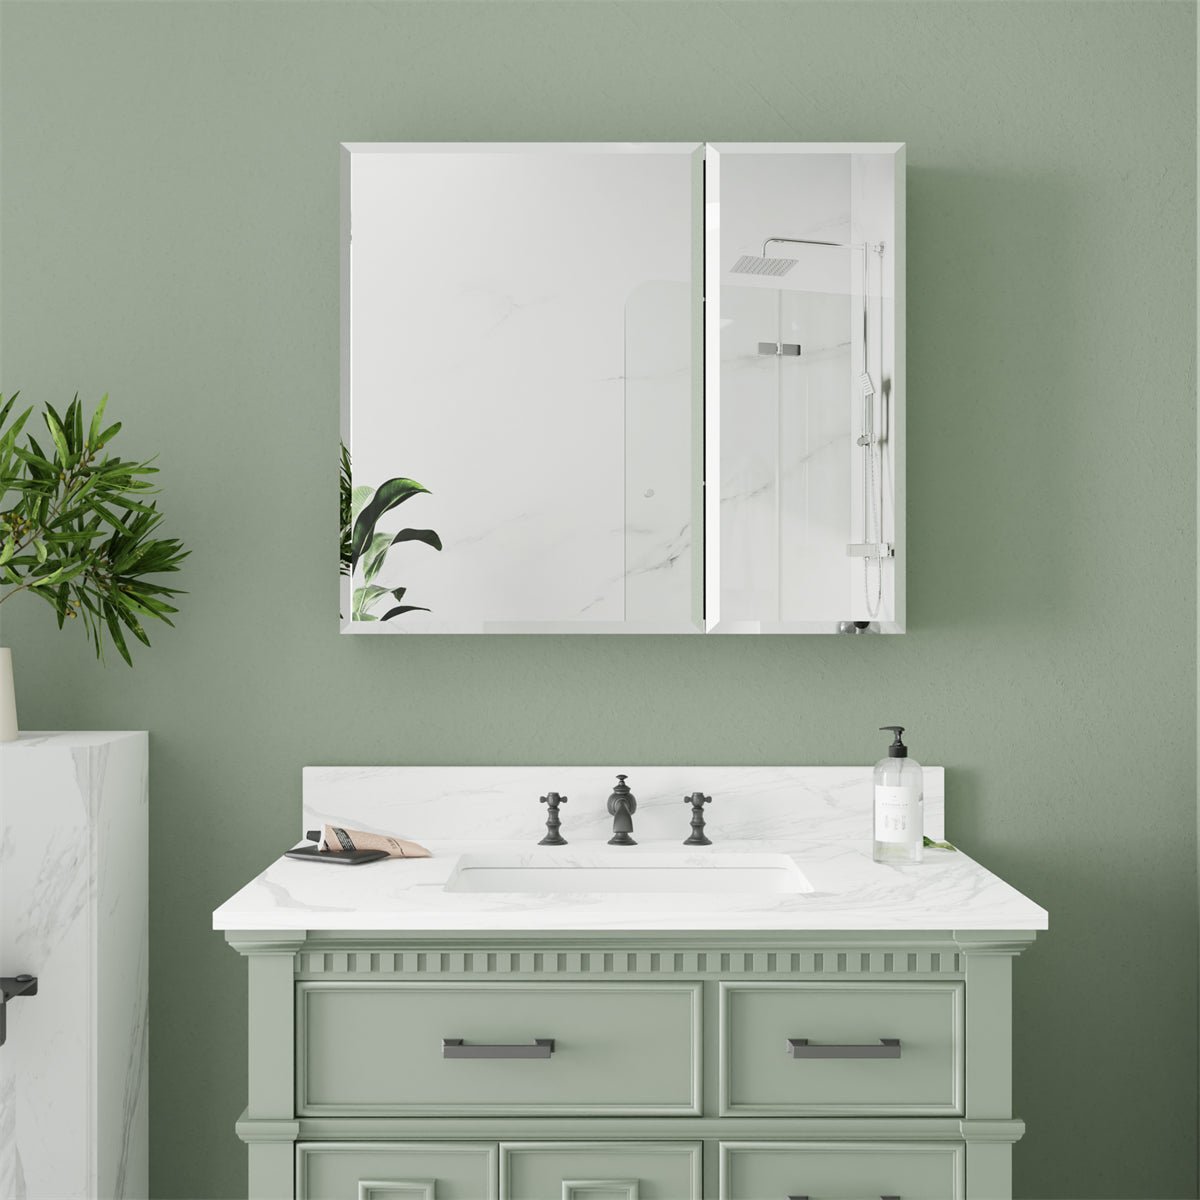 Classic 30" W x 26" H Medicine cabinet with Mirror Surface Mount or Recess aluminum Large storage space